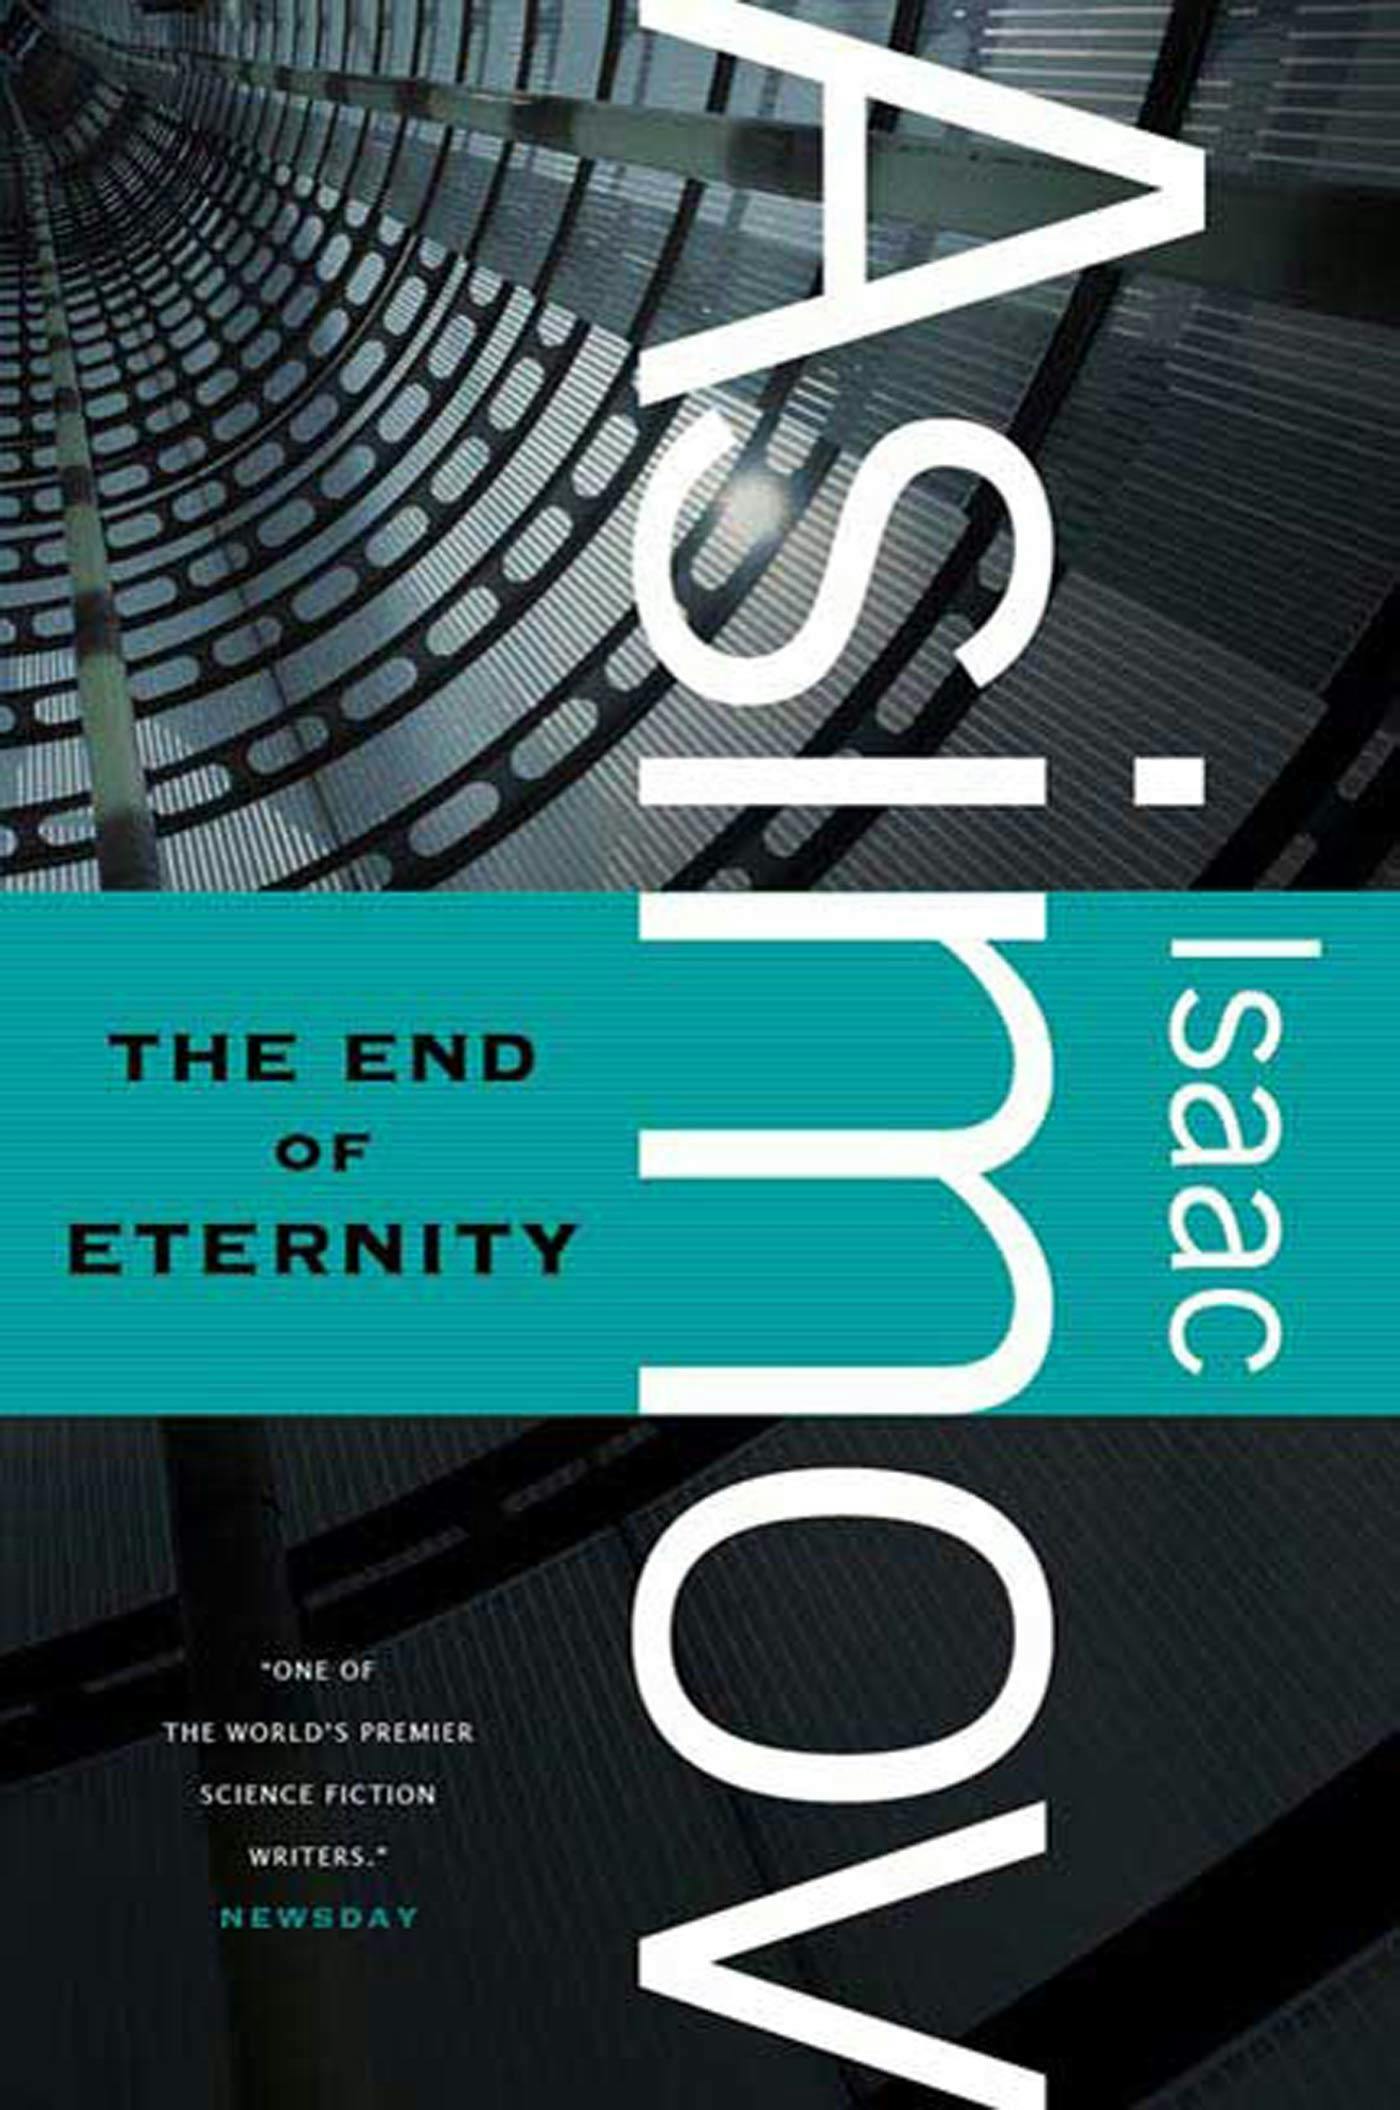 Cover for the book titled as: The End of Eternity